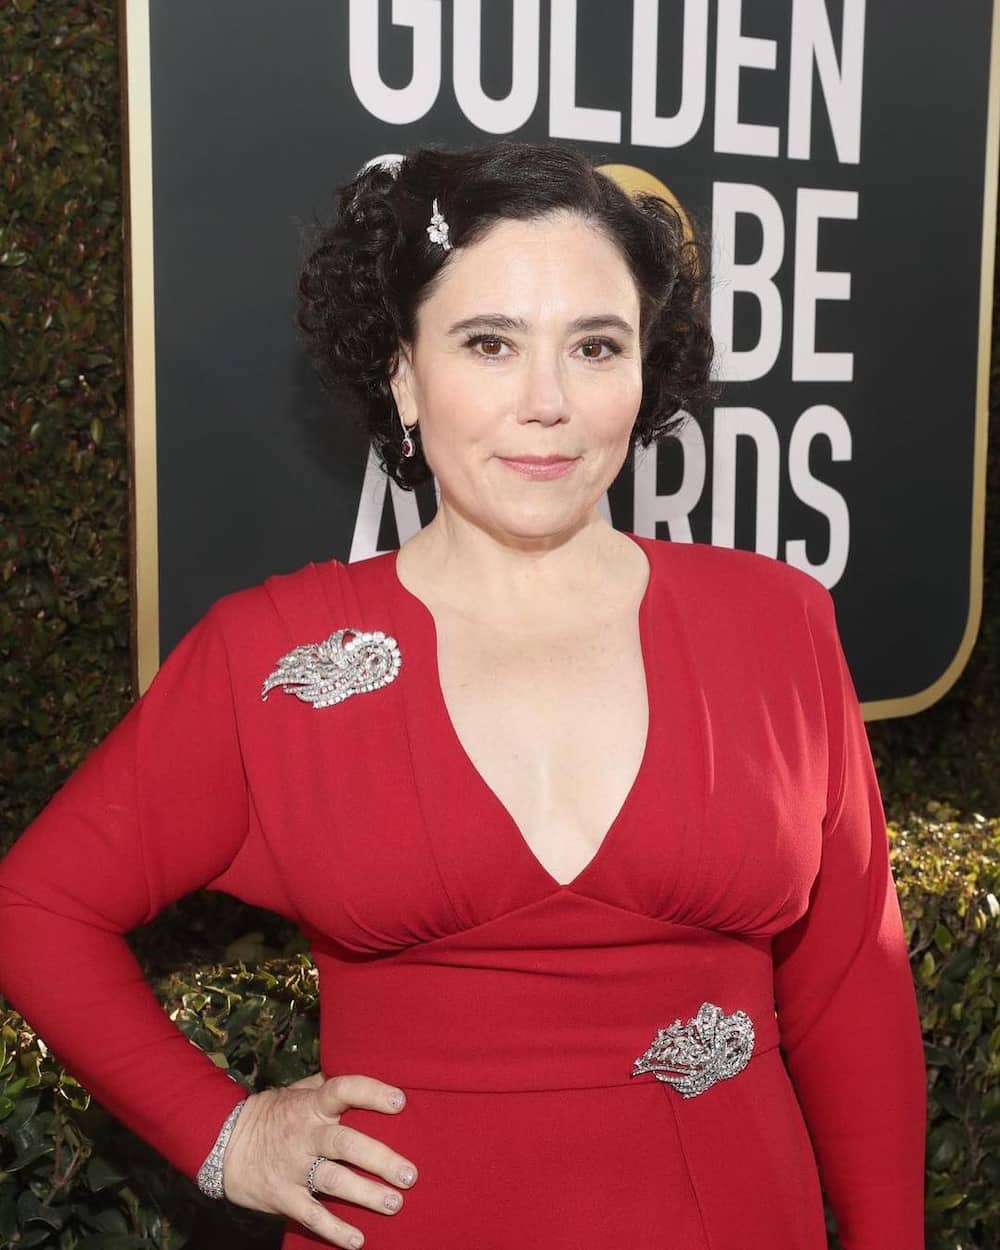 Image of Alex Borstein after losing weight